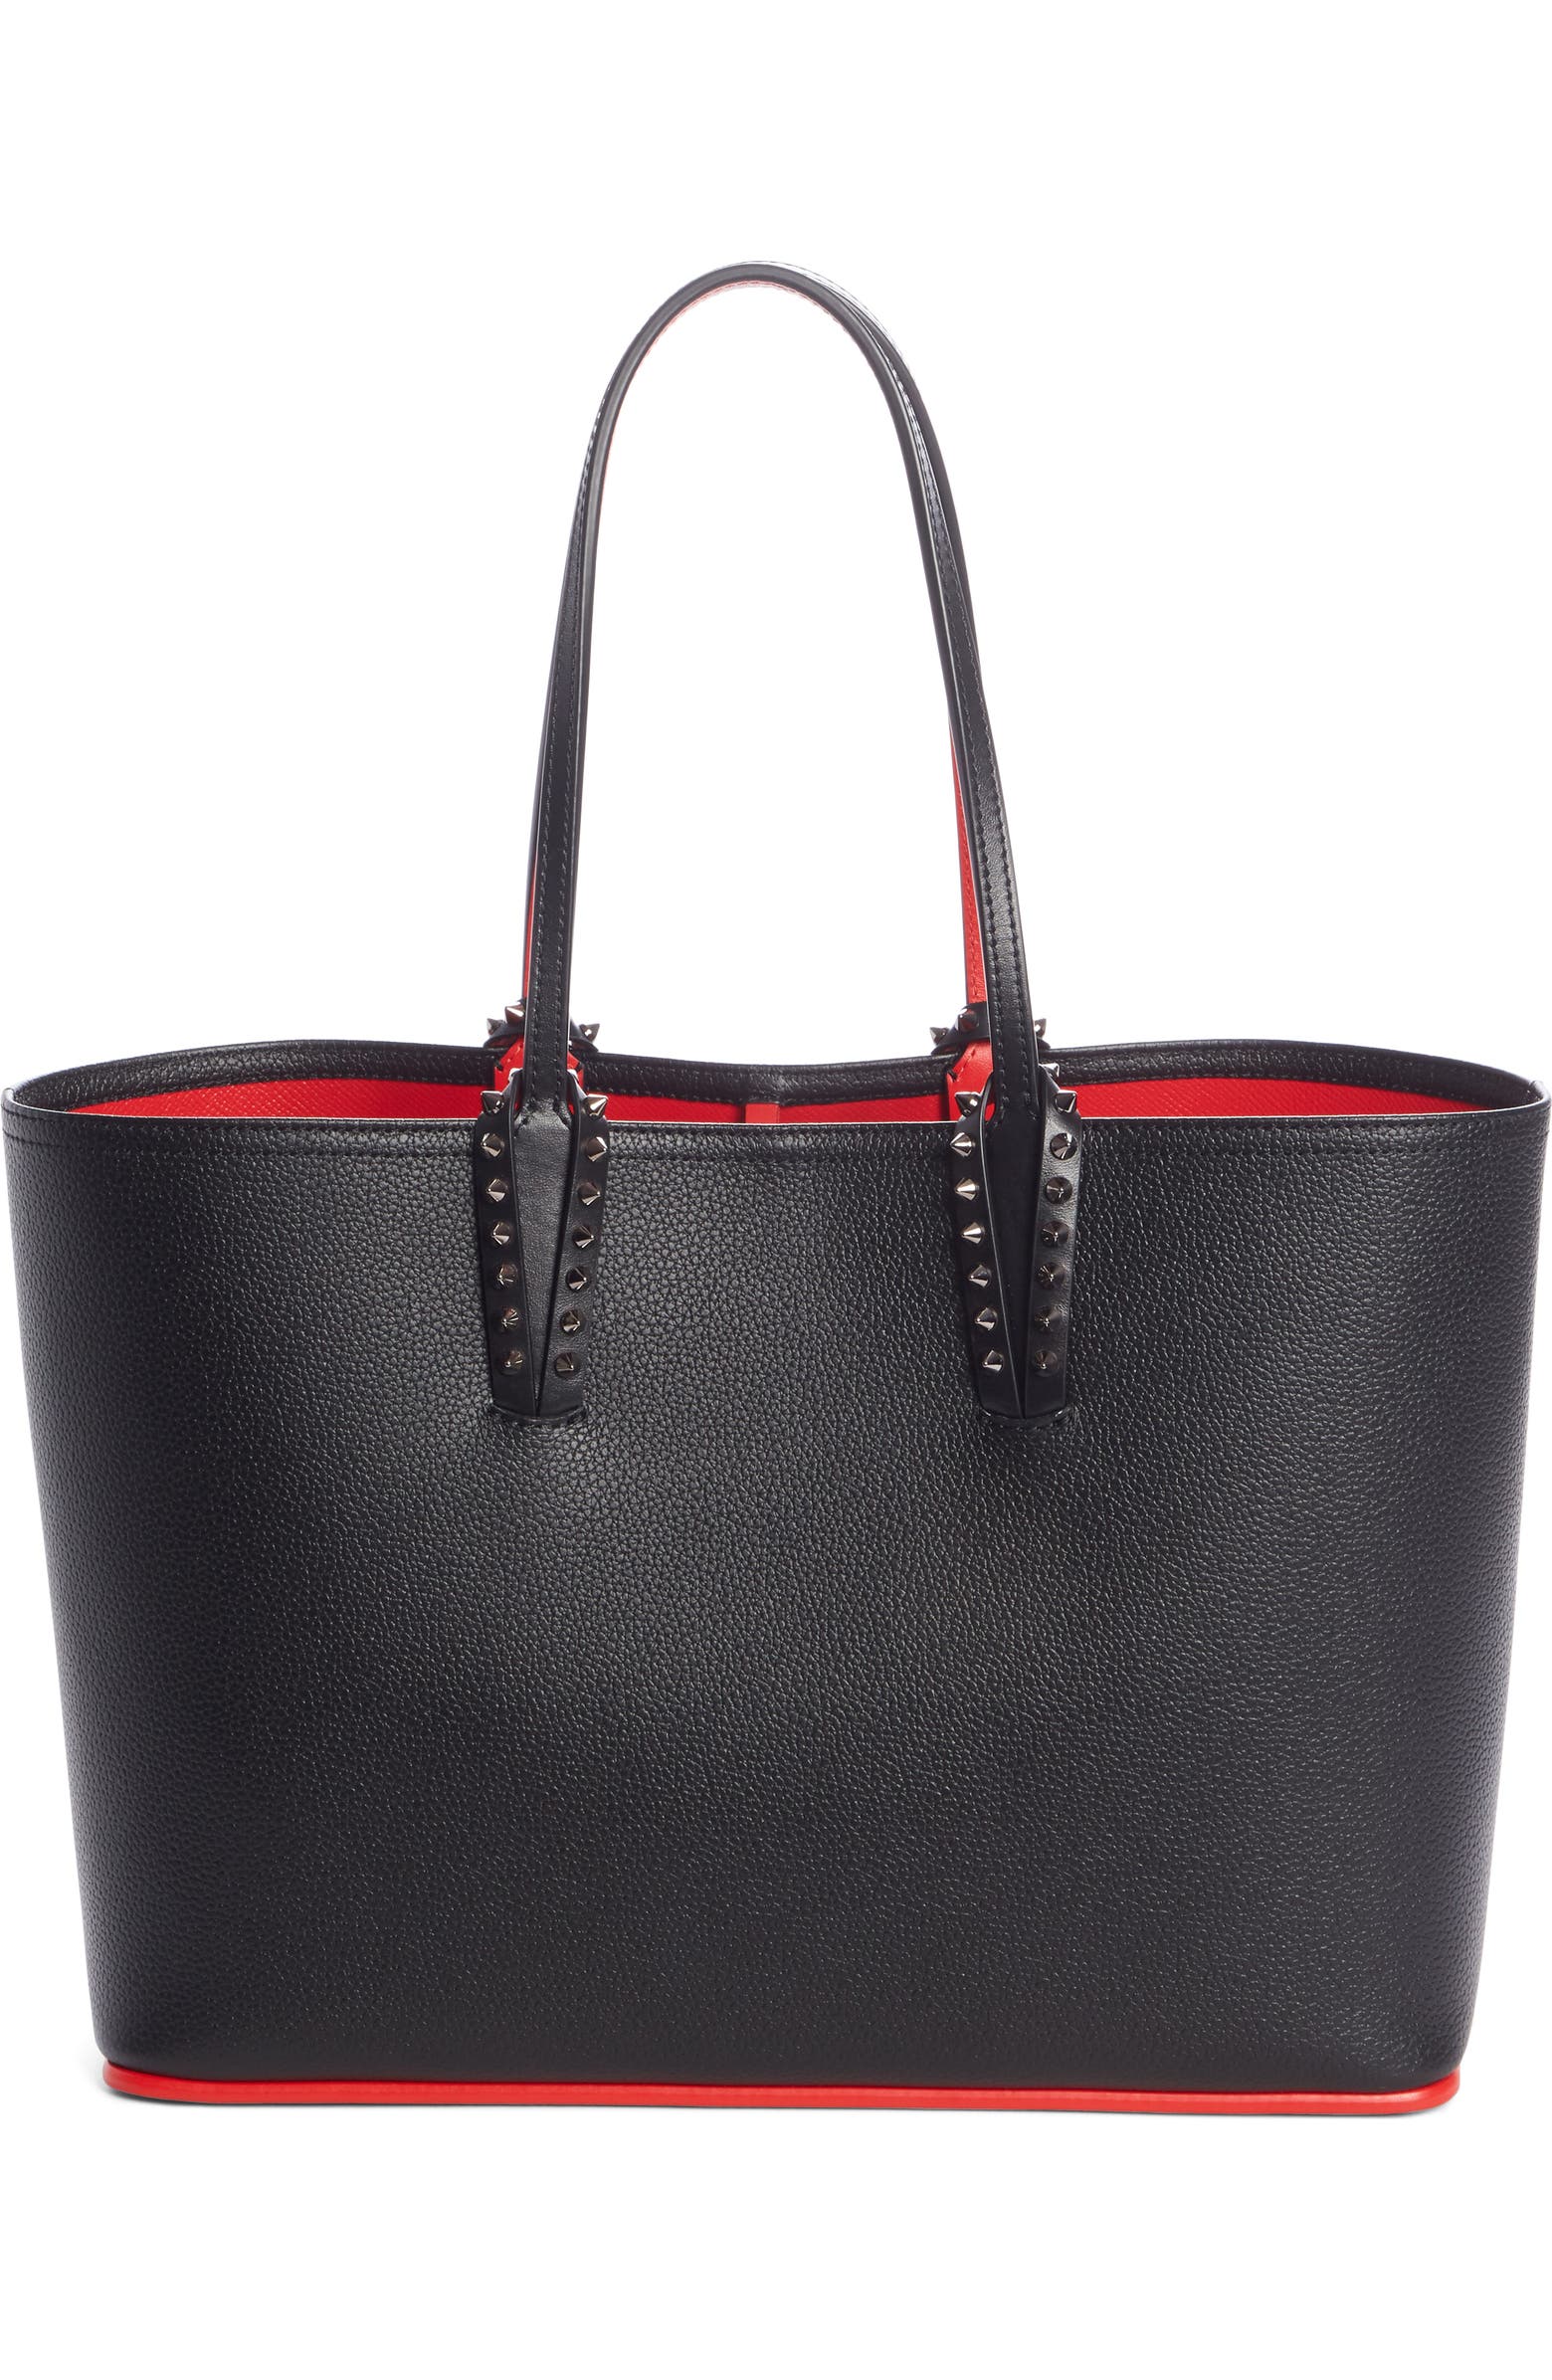 Christian Louboutin Small Cabata Calfskin Leather Tote | Nordstrom